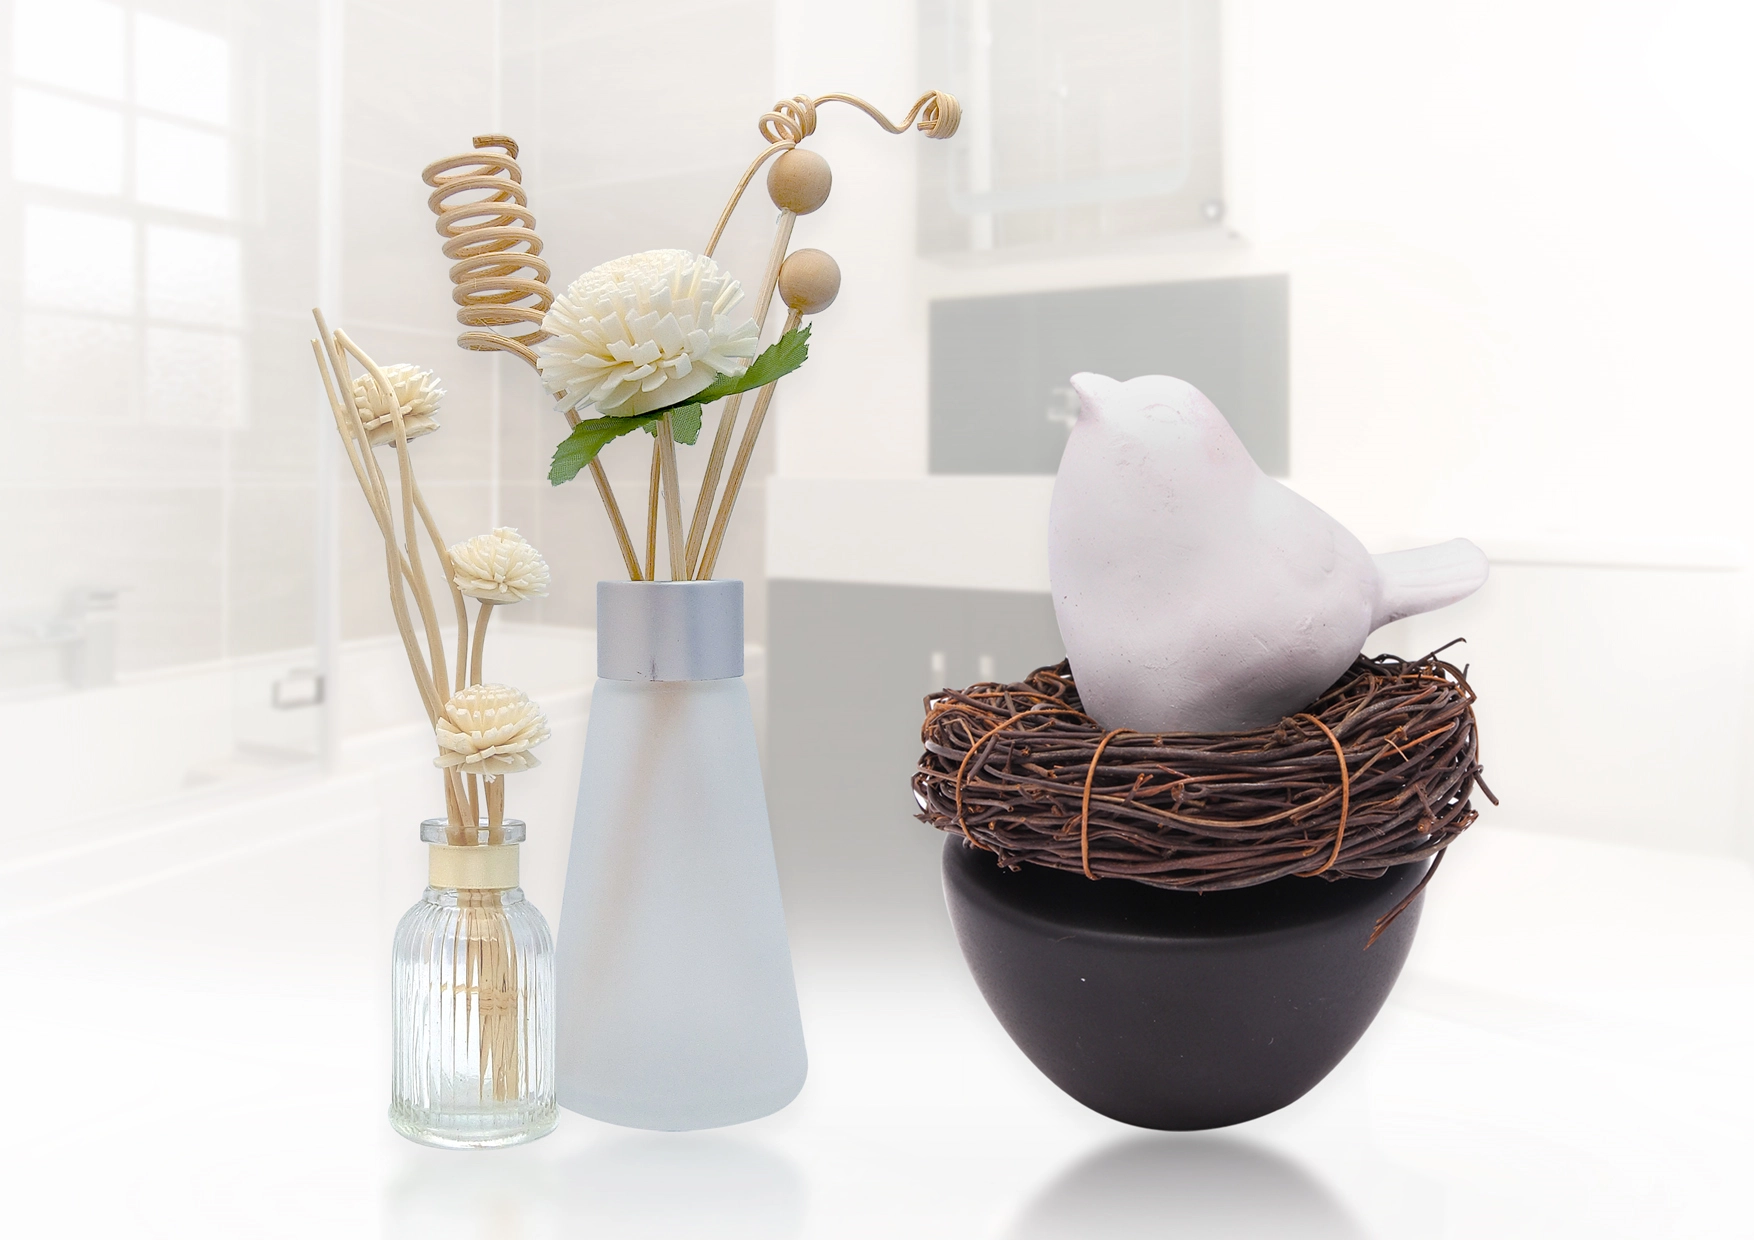 Images of Reed Sticks and Ceramic Aroma Diffusers combined